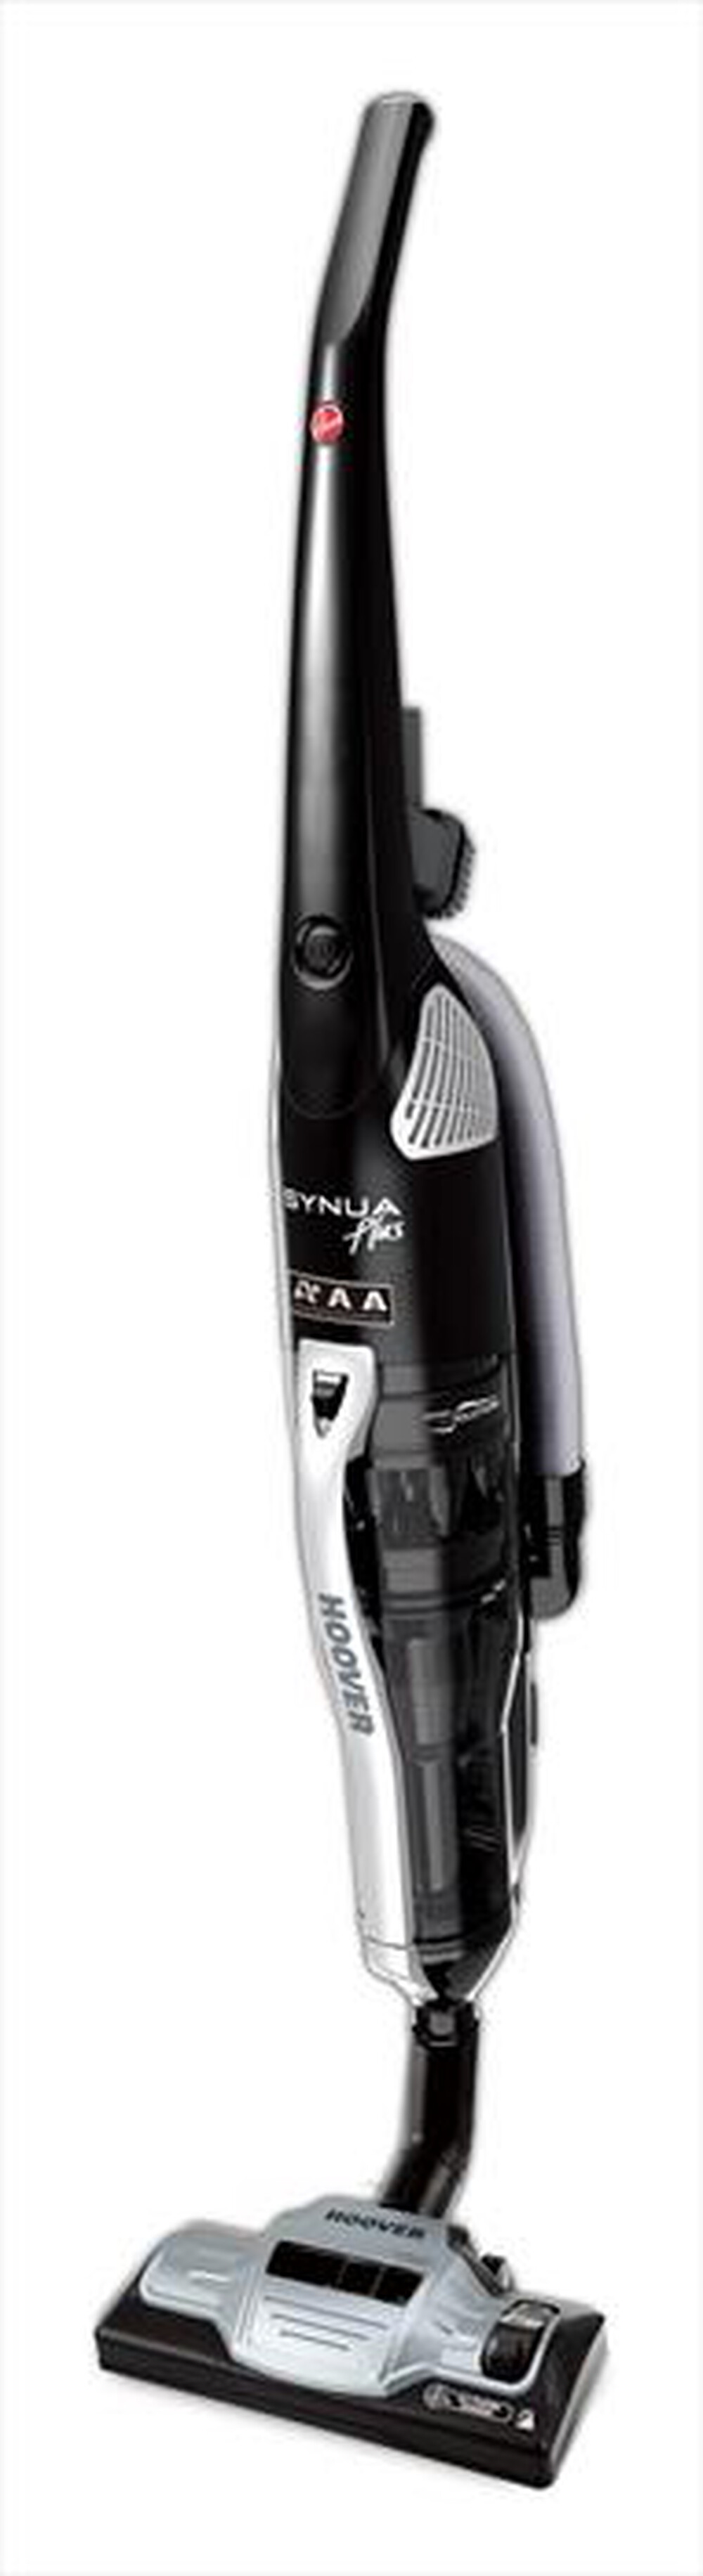 "HOOVER - SY51 SY04011-Luxor Black"